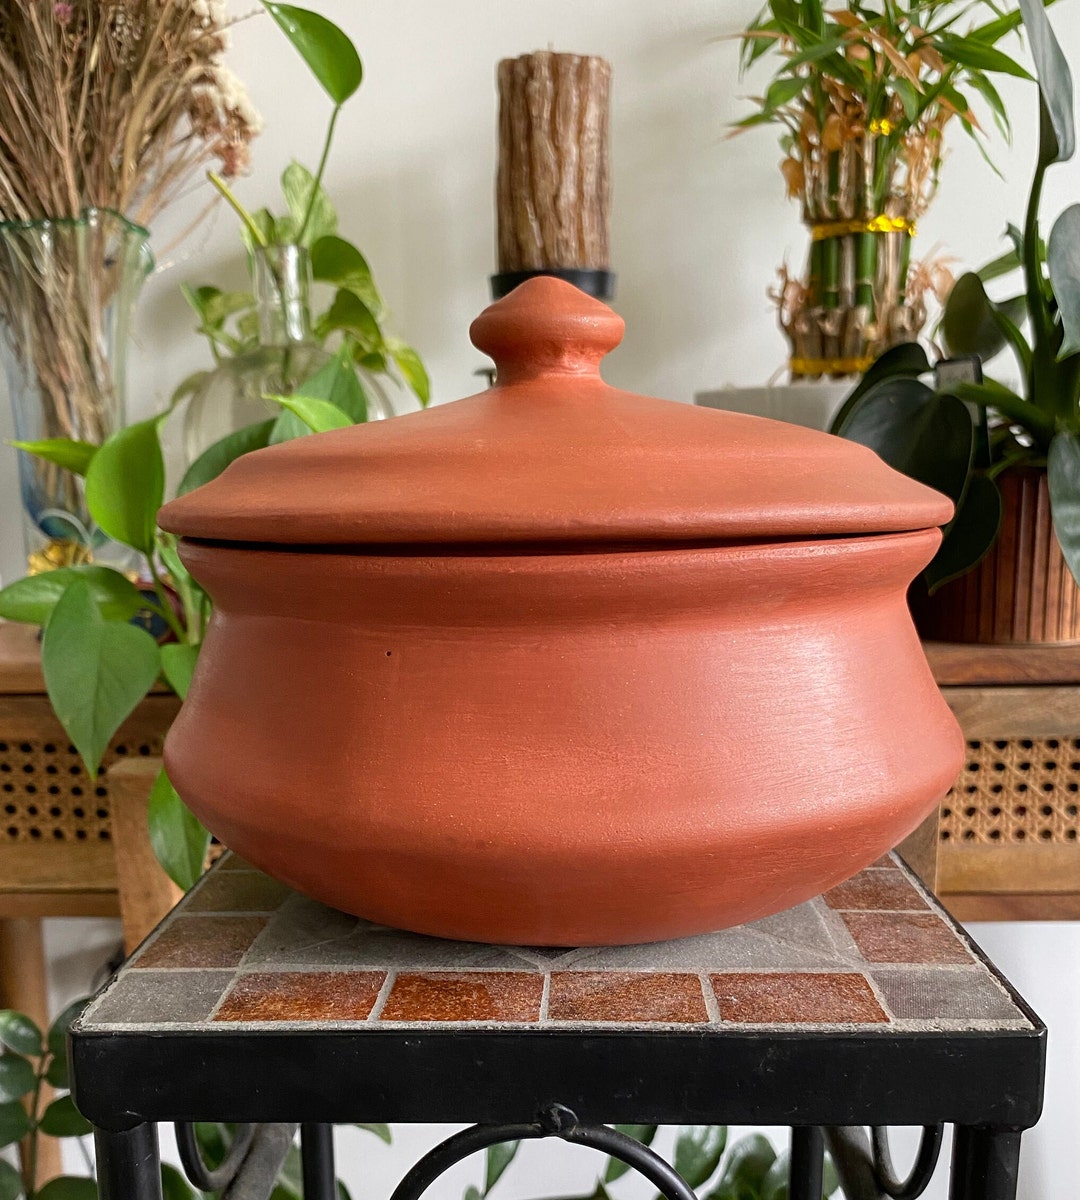 Terracotta / Clay Cooking and Serving Pot. Hand Made, Unglazed handi. 2 Lts  /1.5 Lts/0.8 Lt. Microwave Friendly 